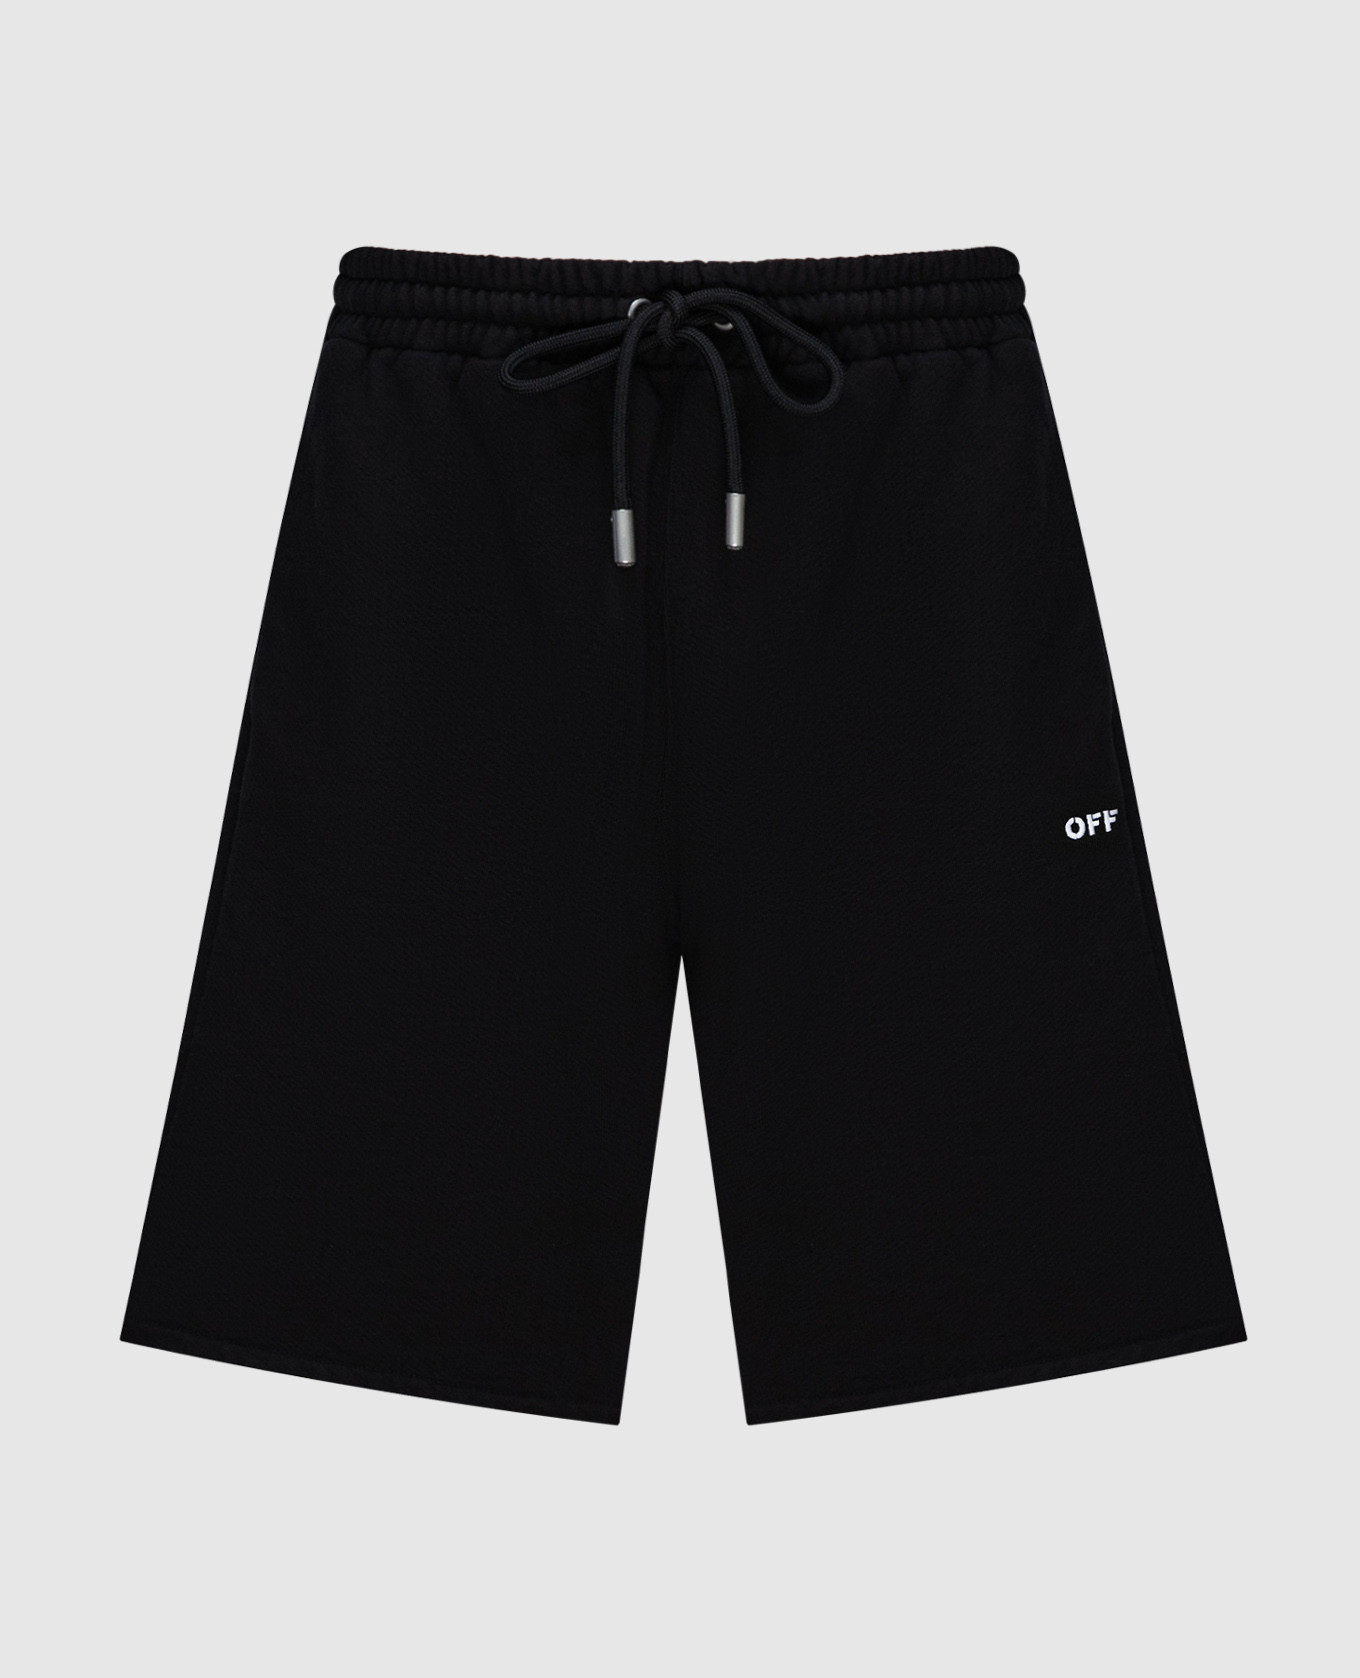 Black shorts with logo embroidery